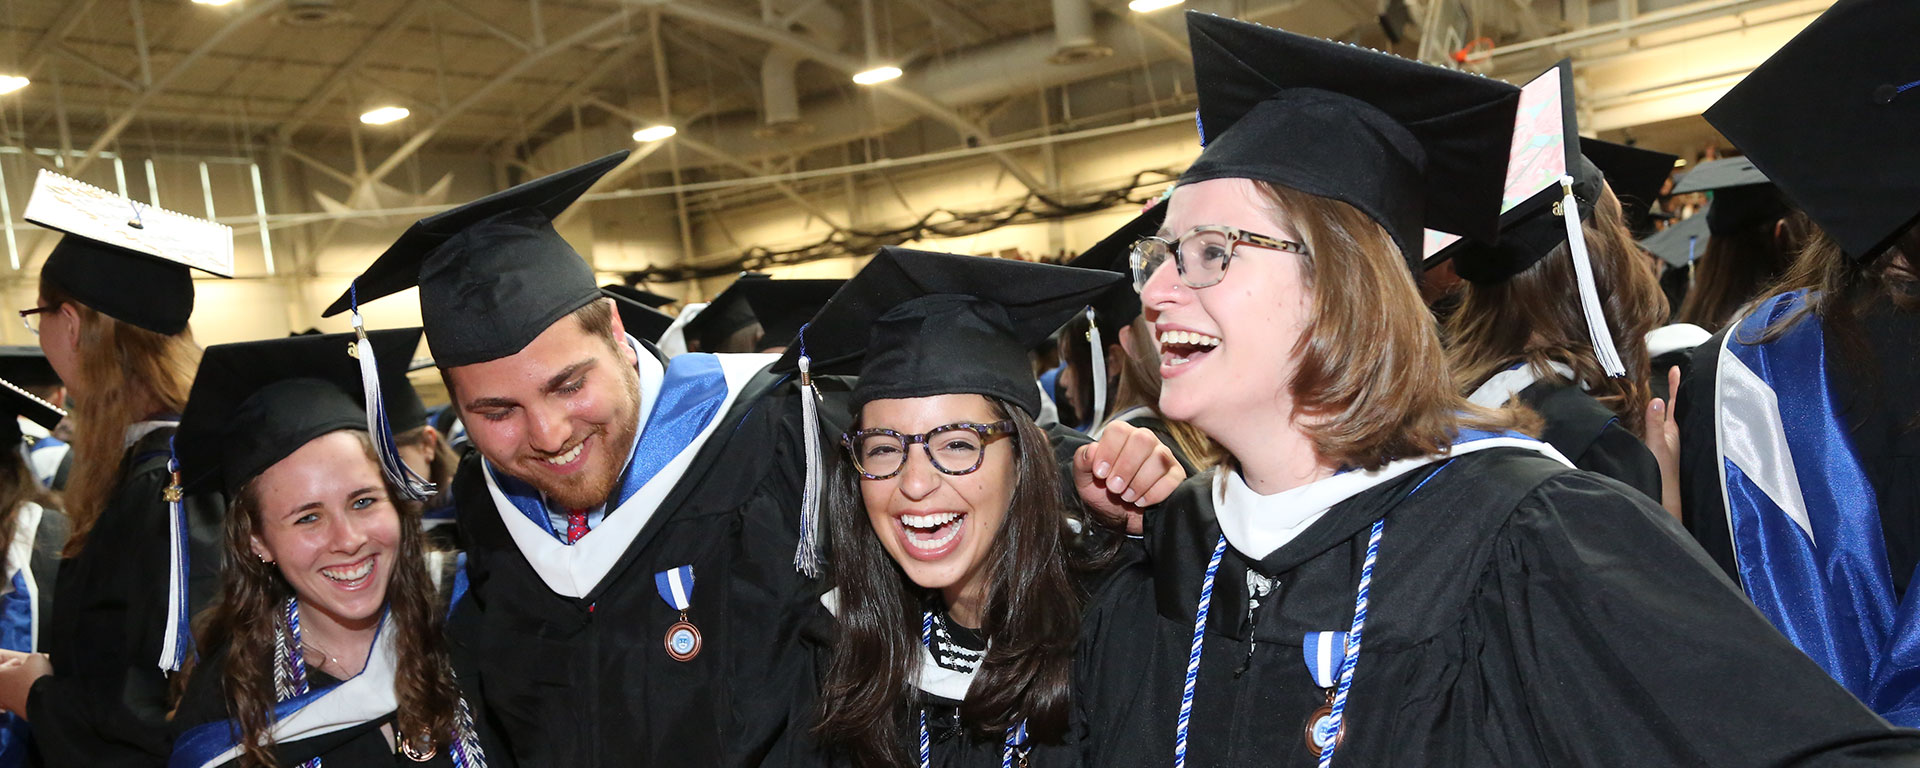 Laughing students in caps and gowns 